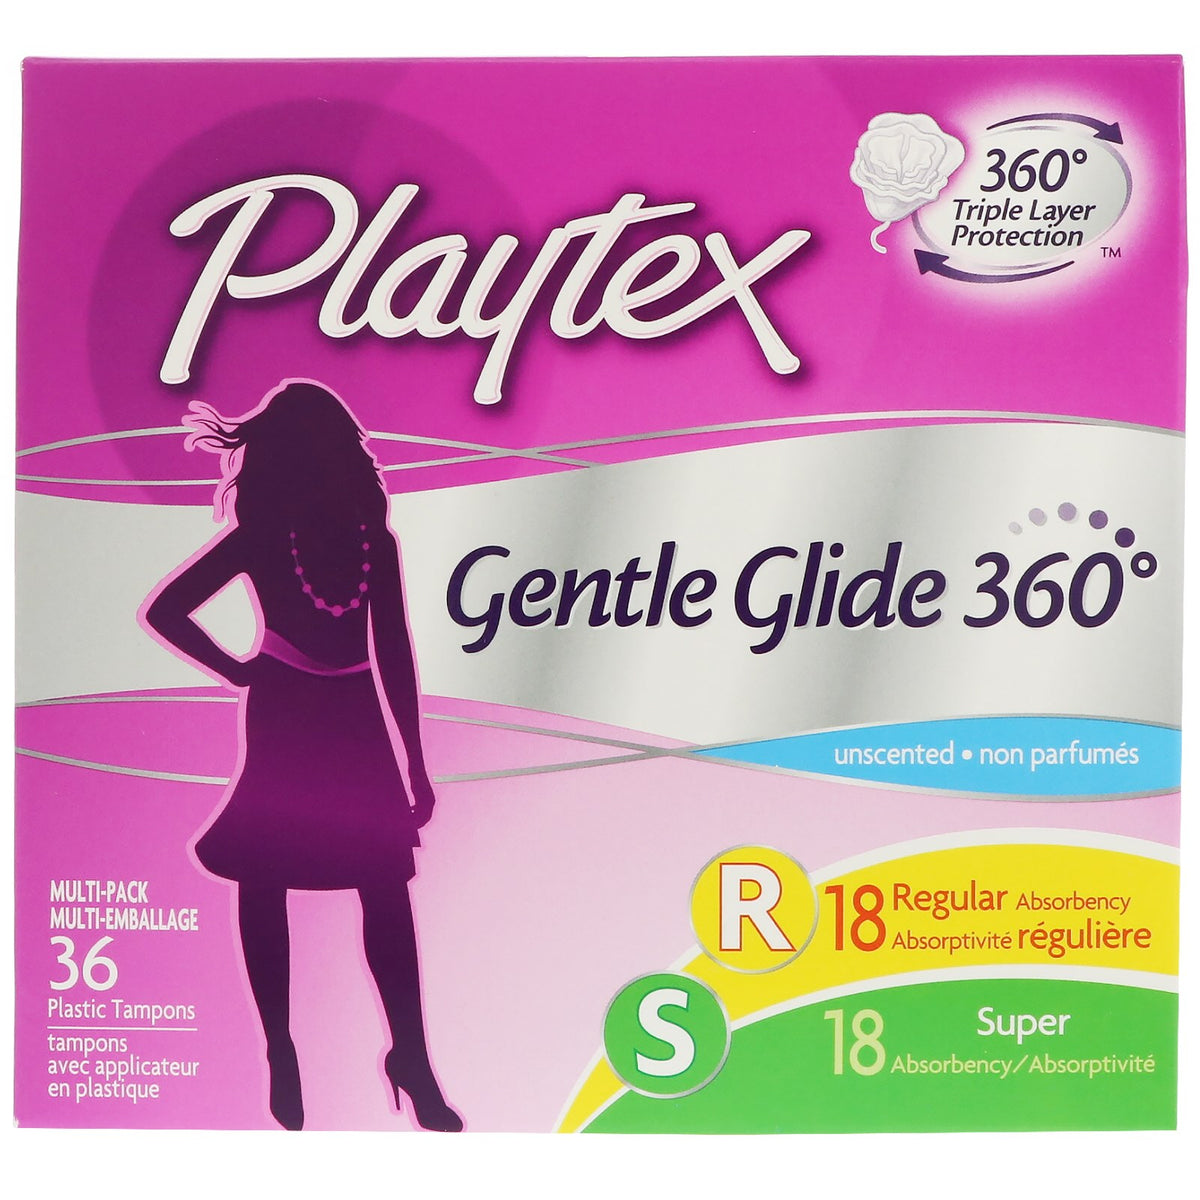 Playtex gentle glide ultra tampons, unscented - 36 ea